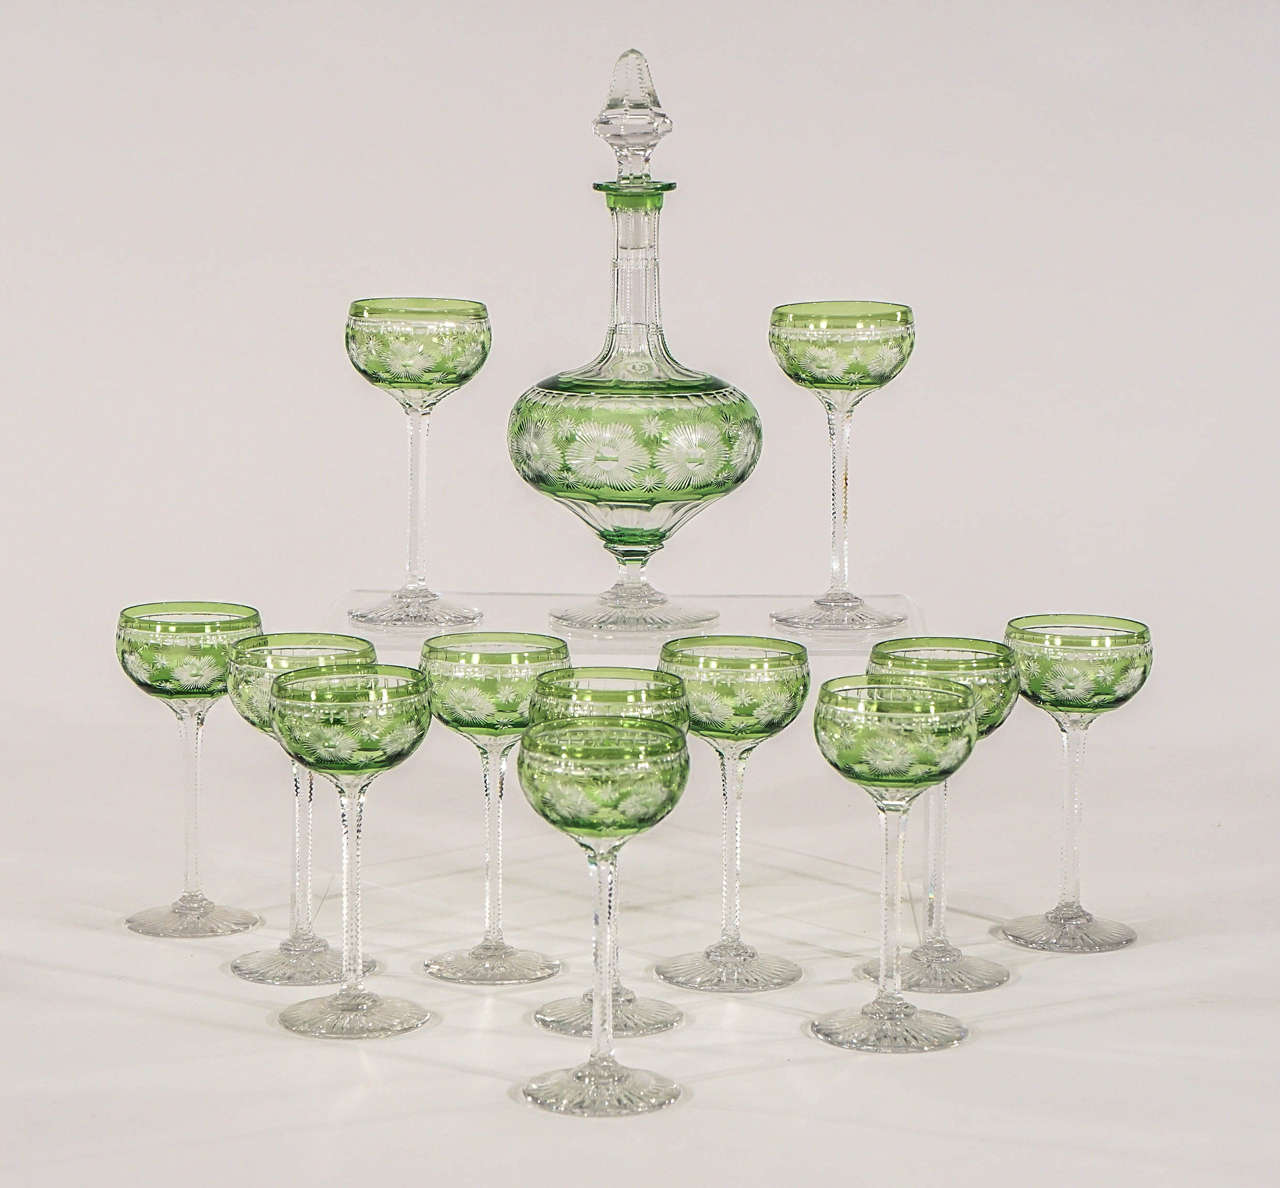 This is a perfect set of 12 handblown crystal cordials cut to clear in an Art Deco inspired floral pattern made by Webb, England. The base is cut with a radiating star pattern and an elegant zipper cut stem. Standing 5 1/4